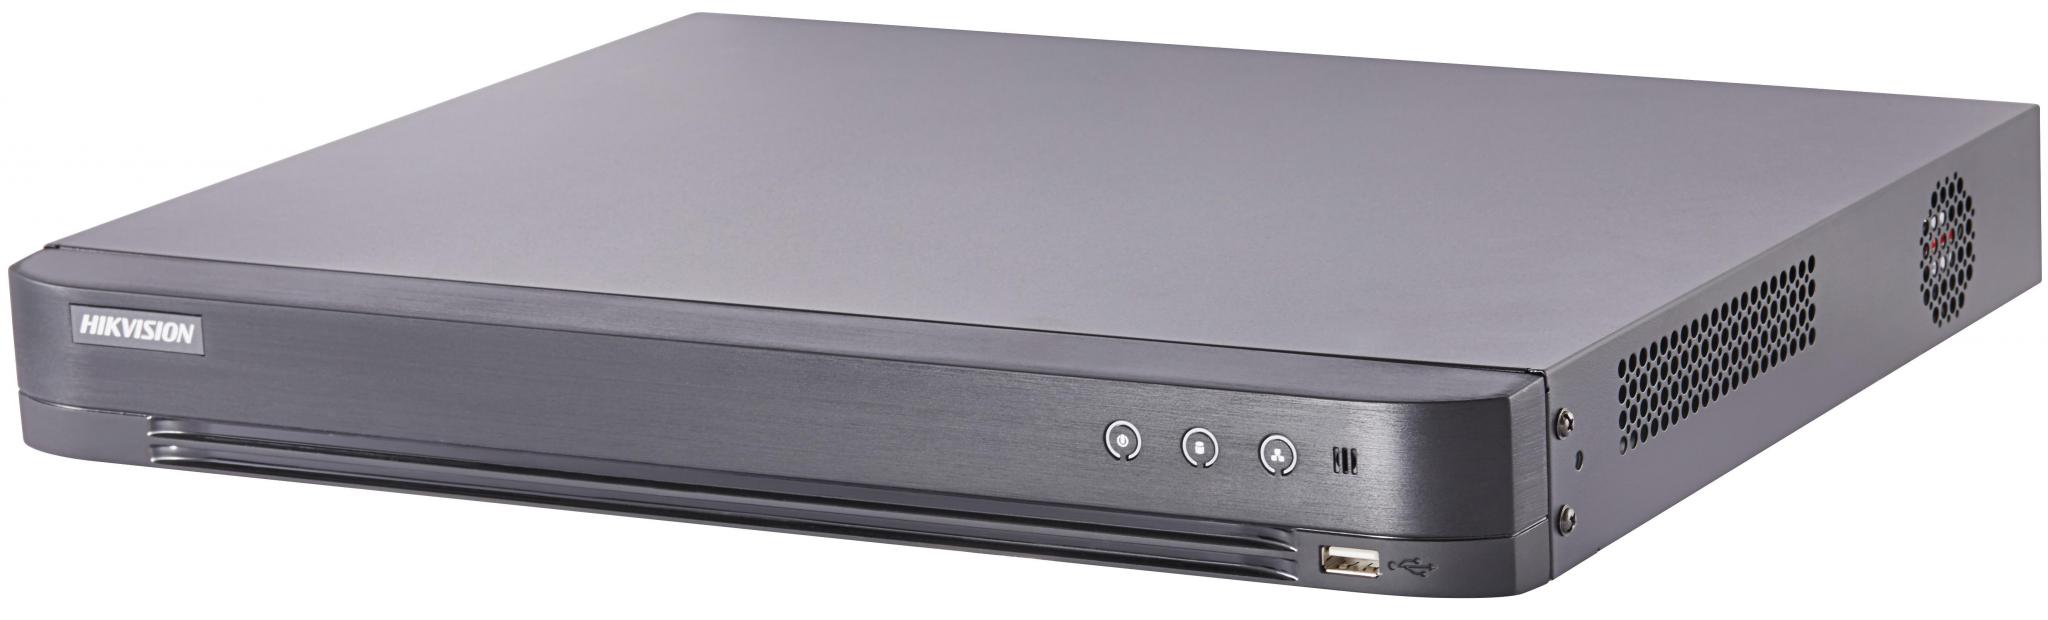 DVR Hikvision Turbo HD 4.0, DS-7204HUHI-K1/P; 5MP; 4 Channel; H265 +;H265;H264+;H264, 4-ch video and 4-ch audio input, 2-ch IP up to 6MP resolution input, 5MP @ 12fps/ch; 4MP @15 fps/ch, built-in PoC, 1 SATA interface, Connectable to Turbo HD/HDCVI/AHD/CVBS signal input, HDMI/VGA and CVBS Output, 2*